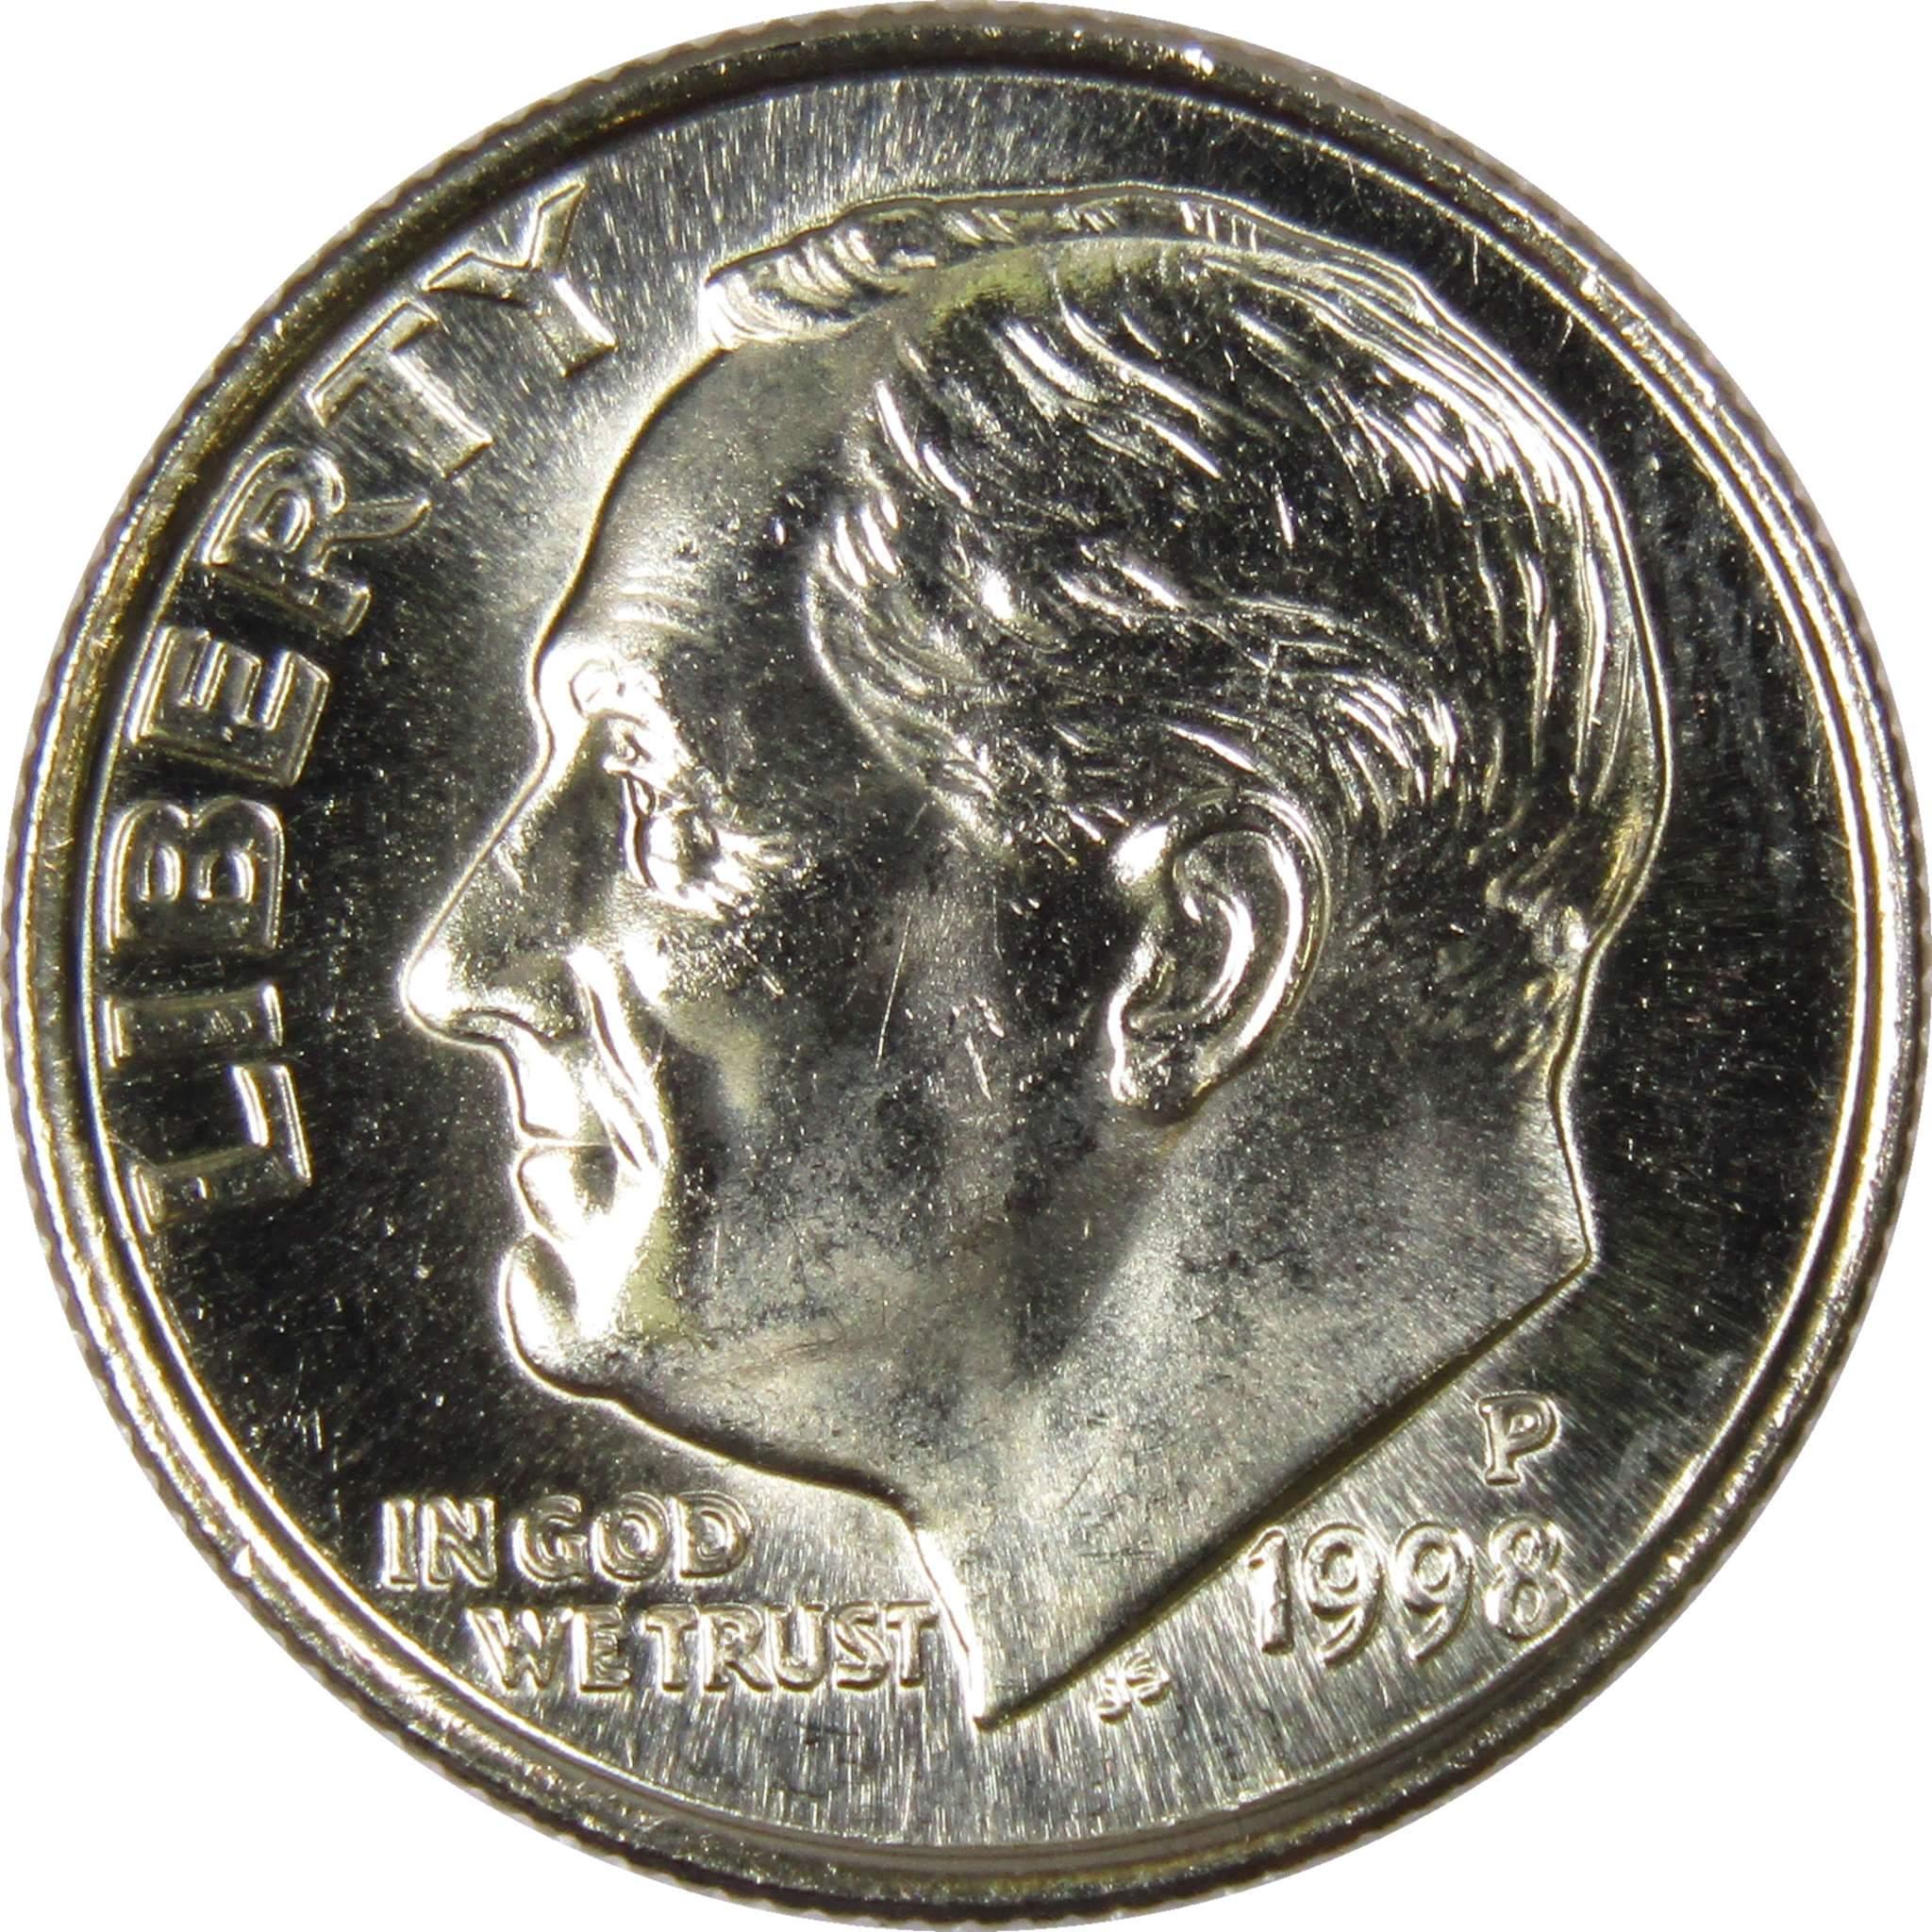 1998 P Roosevelt Dime BU Uncirculated Mint State 10c US Coin Collectible